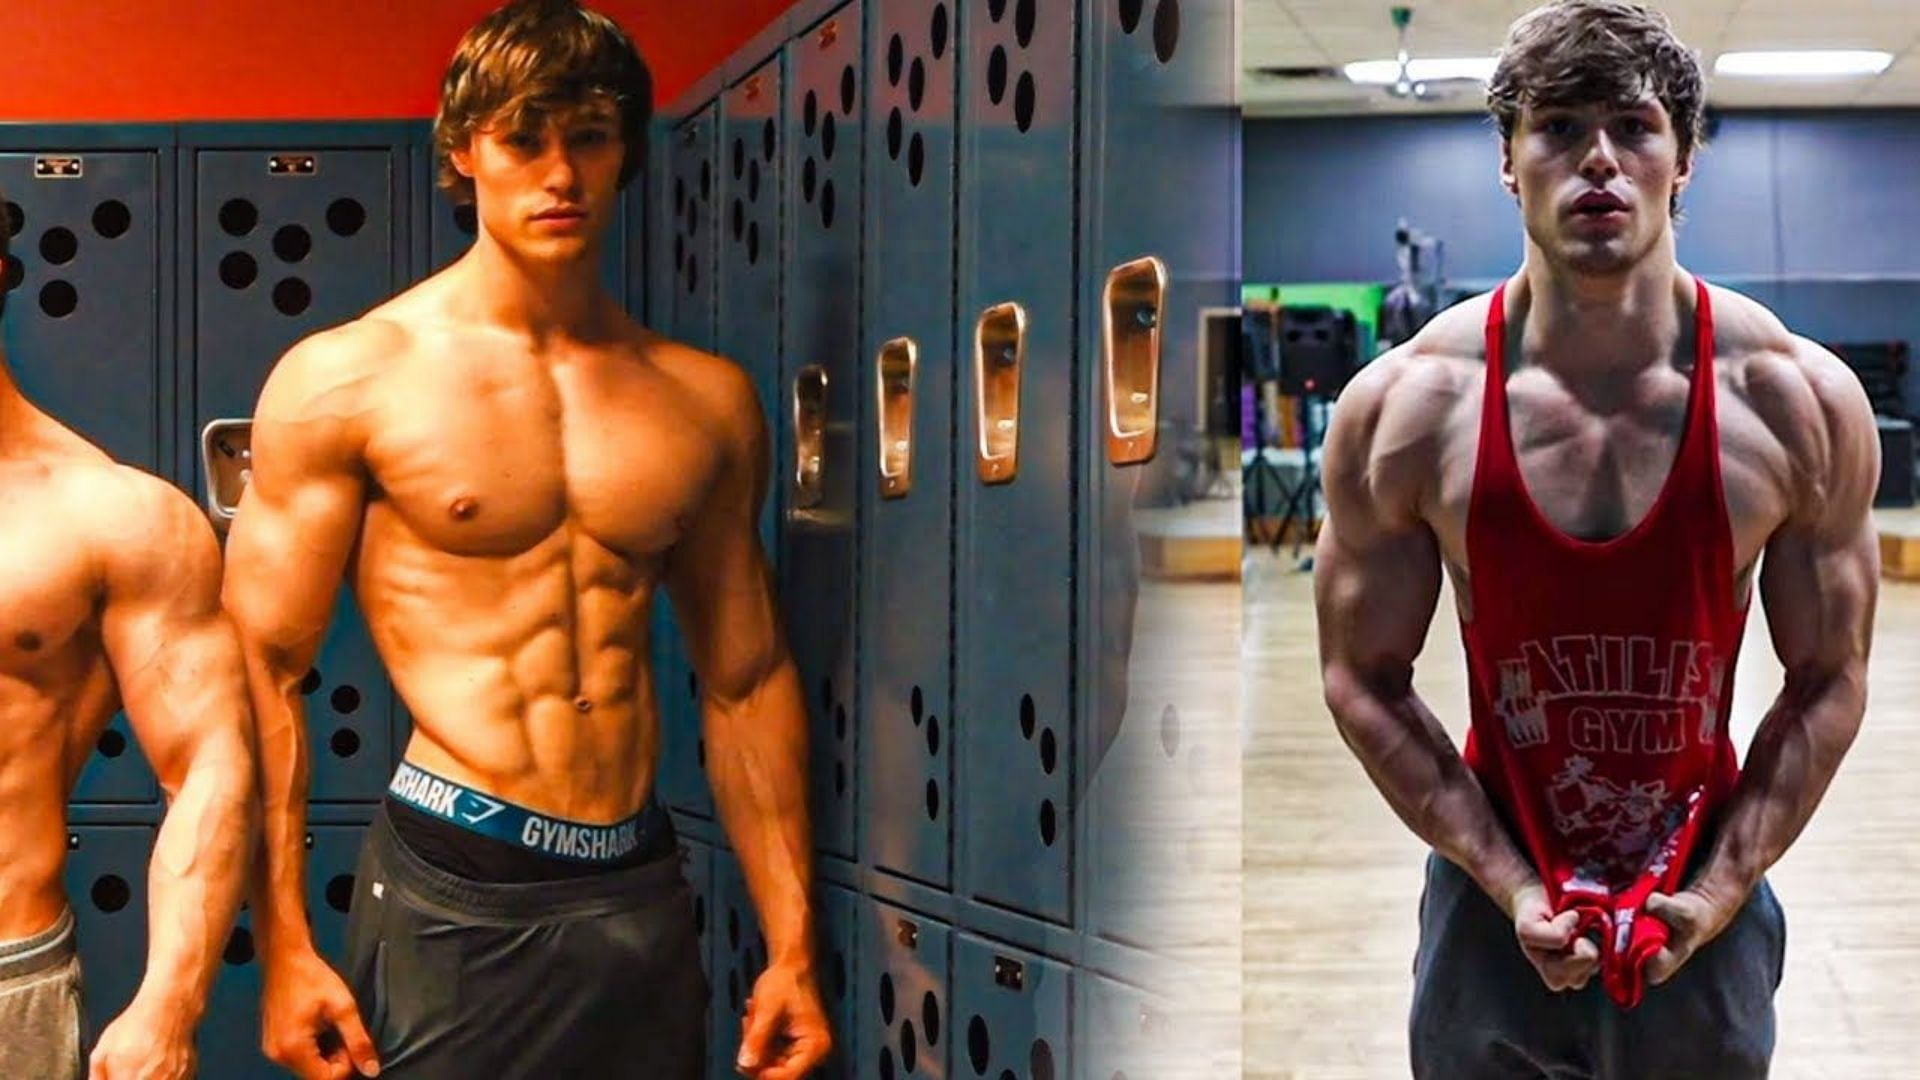 Natty Dairies: What Is the Secret Behind David Laid's Transformation?